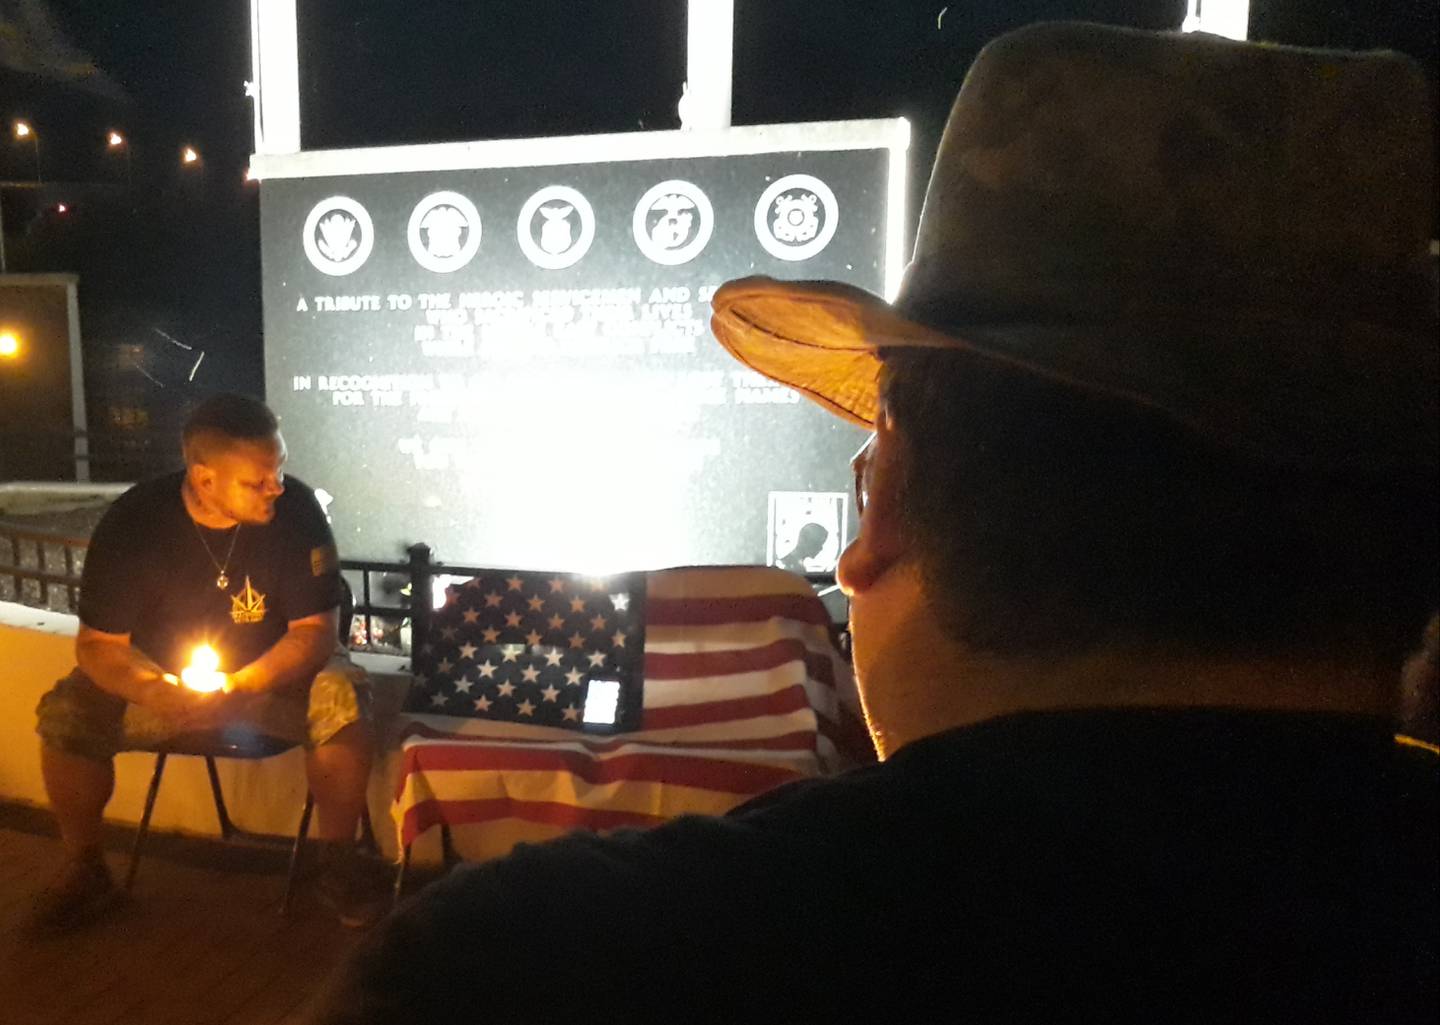 Joseph Combs, who was twice deployed serving in the Tennessee Army National Guard, speaks Saturday, Aug. 13, 2022, during a candlelight vigil at the Middle East Conflicts Wall in Marseilles about his friend Anthony Seig, who was killed in combat a week before turning 20 years old.